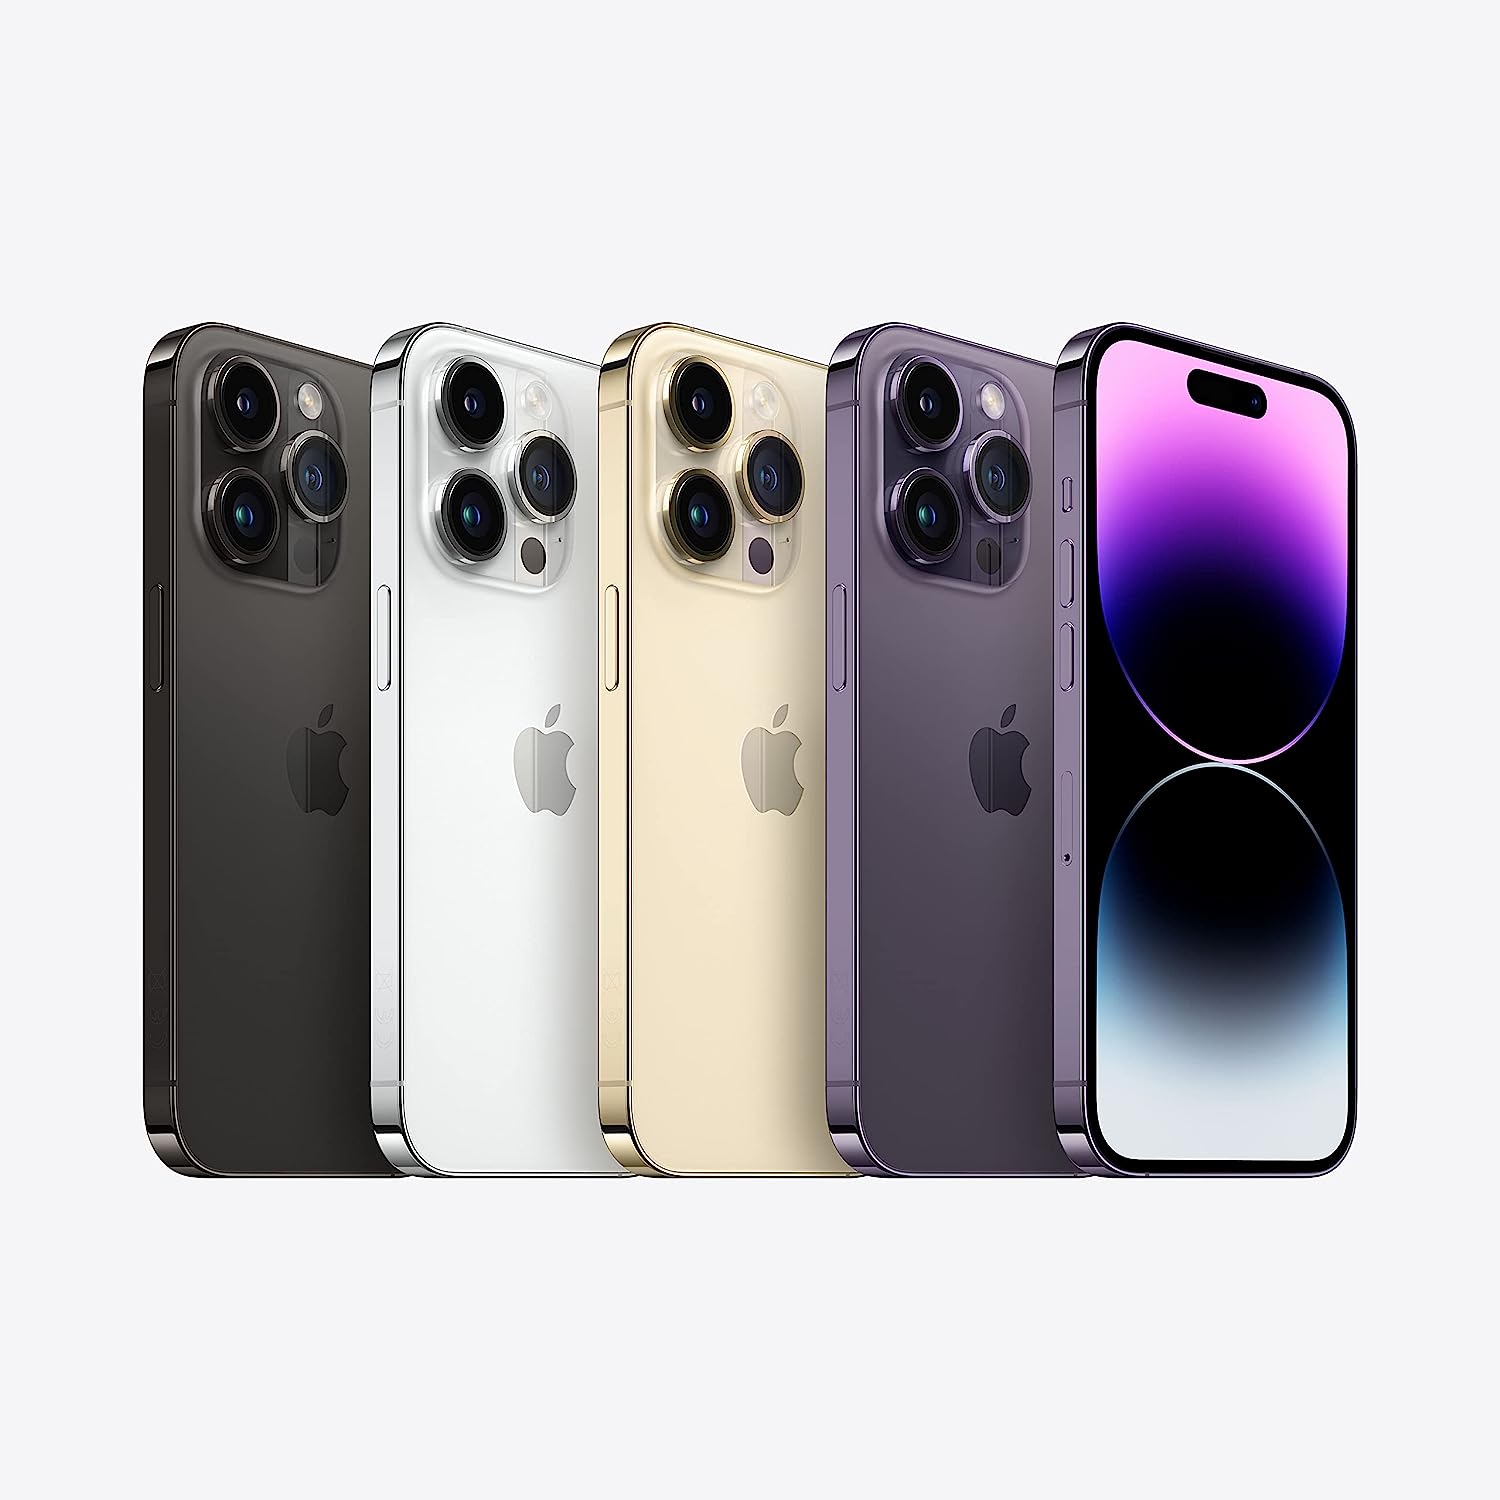 The image shows a lineup of four iPhone 14 Pro Max's from the same manufacturer, presented in different colors. Each phone has a triple-camera system on the back. There is also a front view of a phone with a distinctive notch at the top of the screen, which is displaying a wallpaper with a purple to black gradient. The design and camera arrangement suggest that these are high-end smartphones from a notable manufacturer.